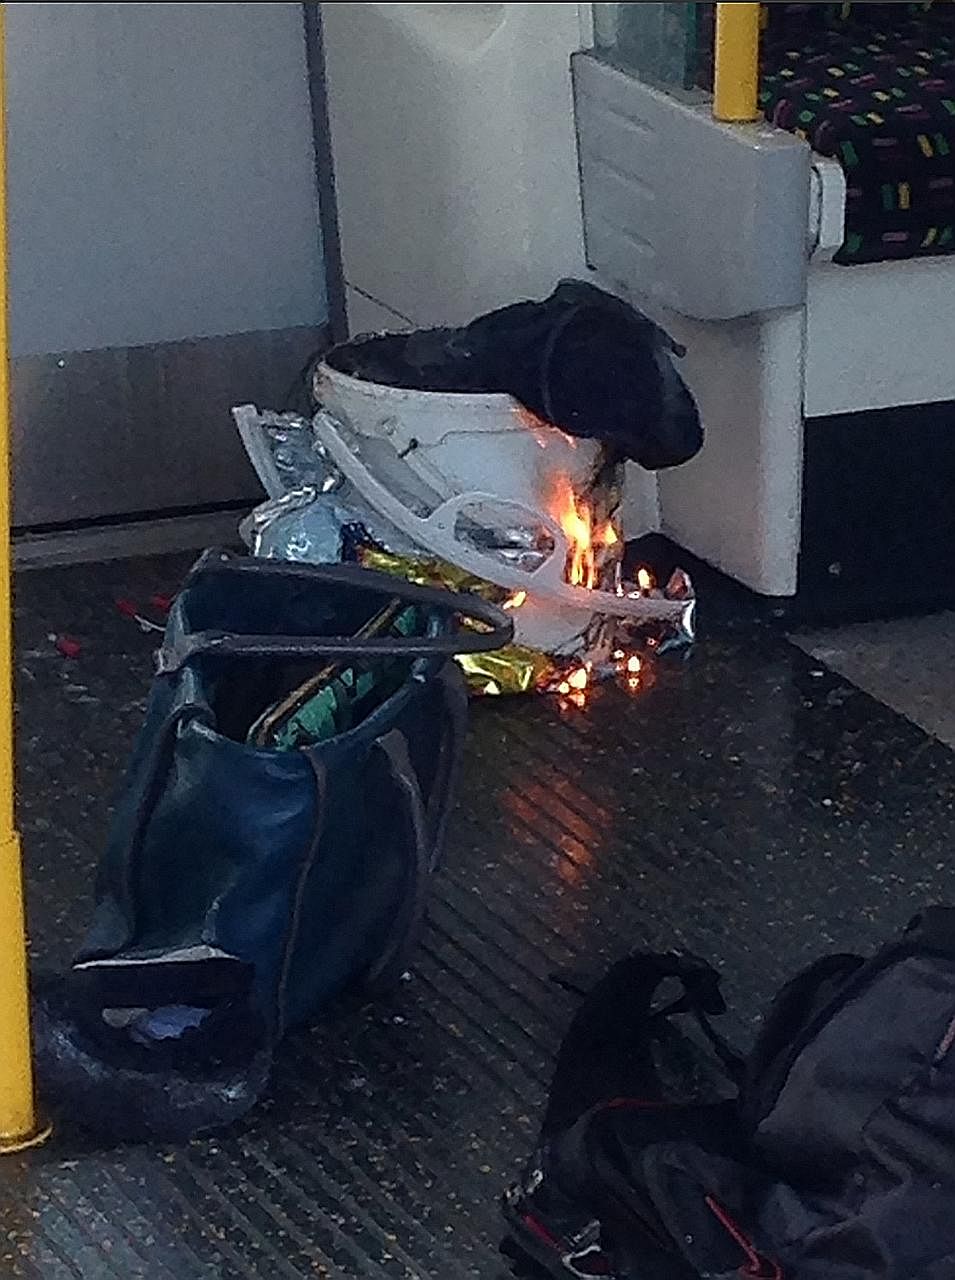 Right: The London Ambulance Service said none of the victims "is thought to be in a serious or life-threatening condition". Above: A photo posted by a Twitter user showing a white bucket burning inside the train carriage.